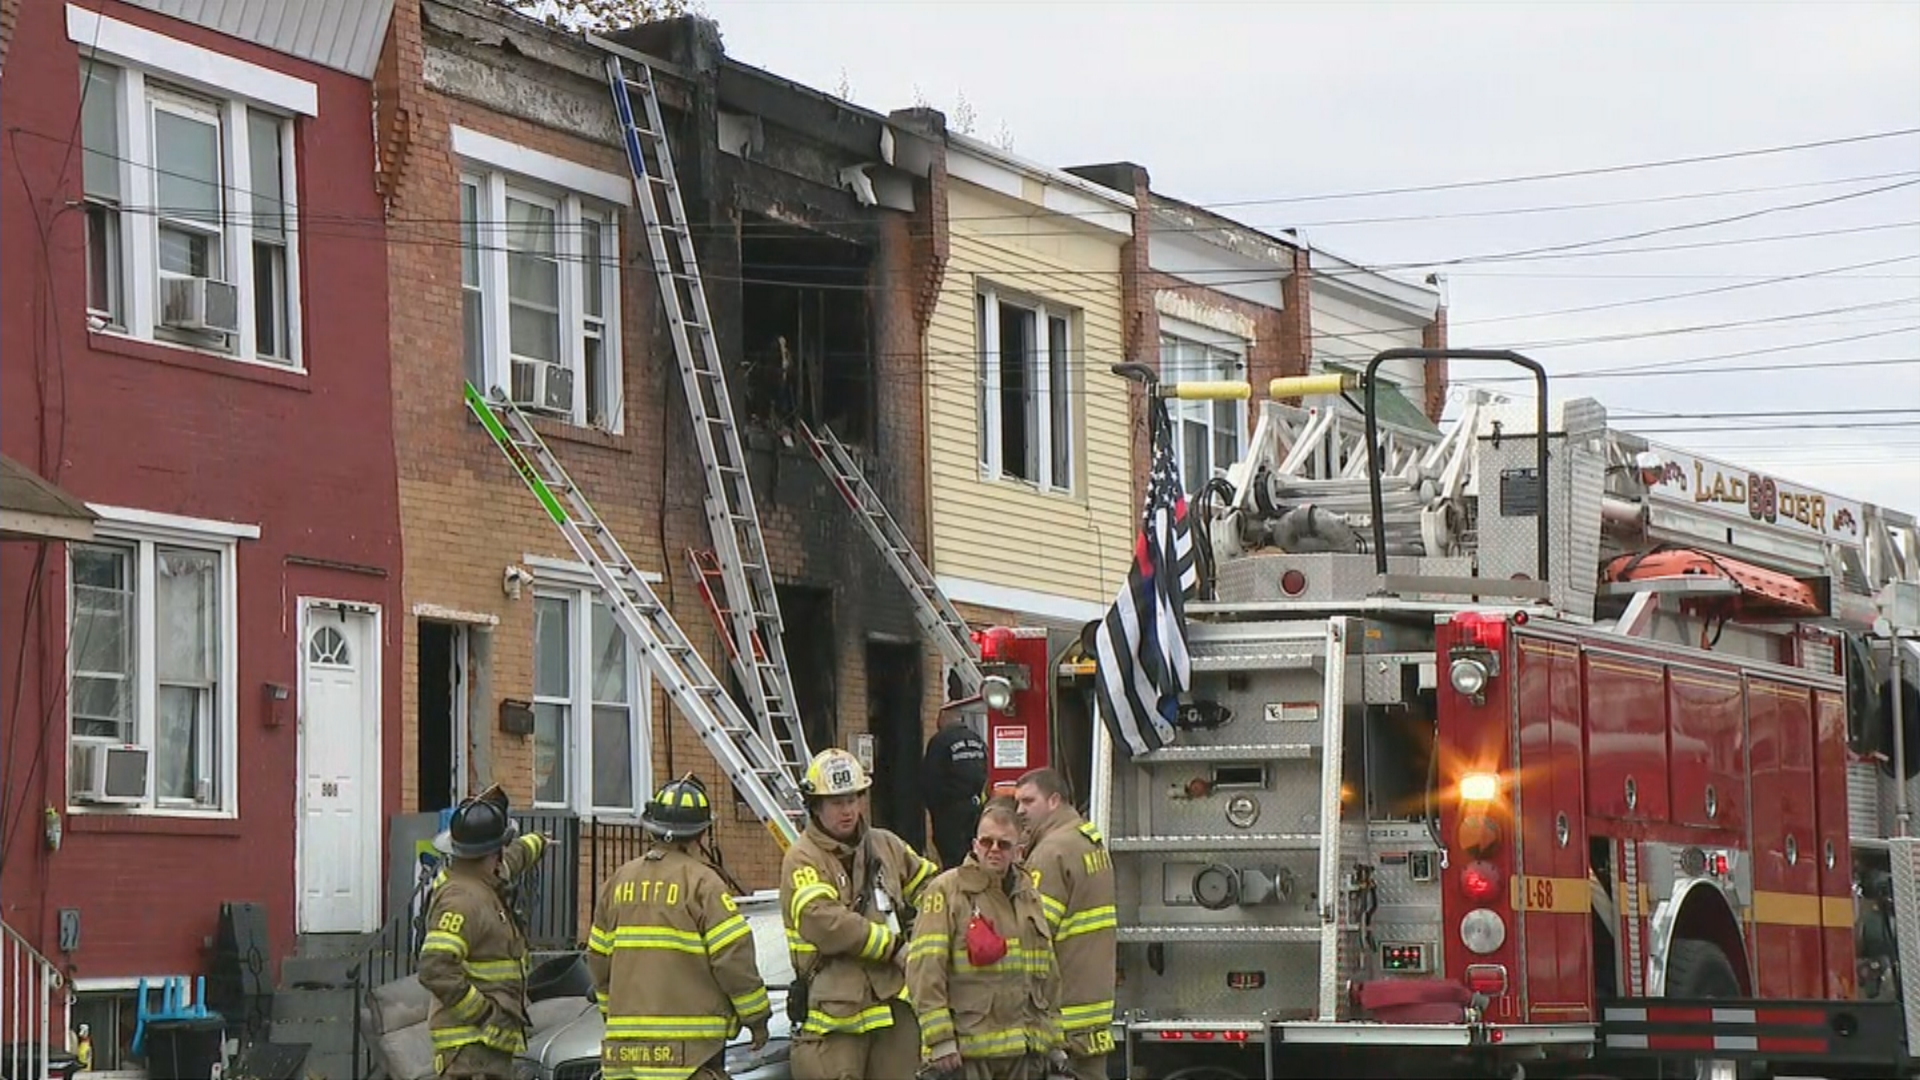 2-Alarm Fire In Chester, Delaware County Leaves Woman Dead, Officials Say